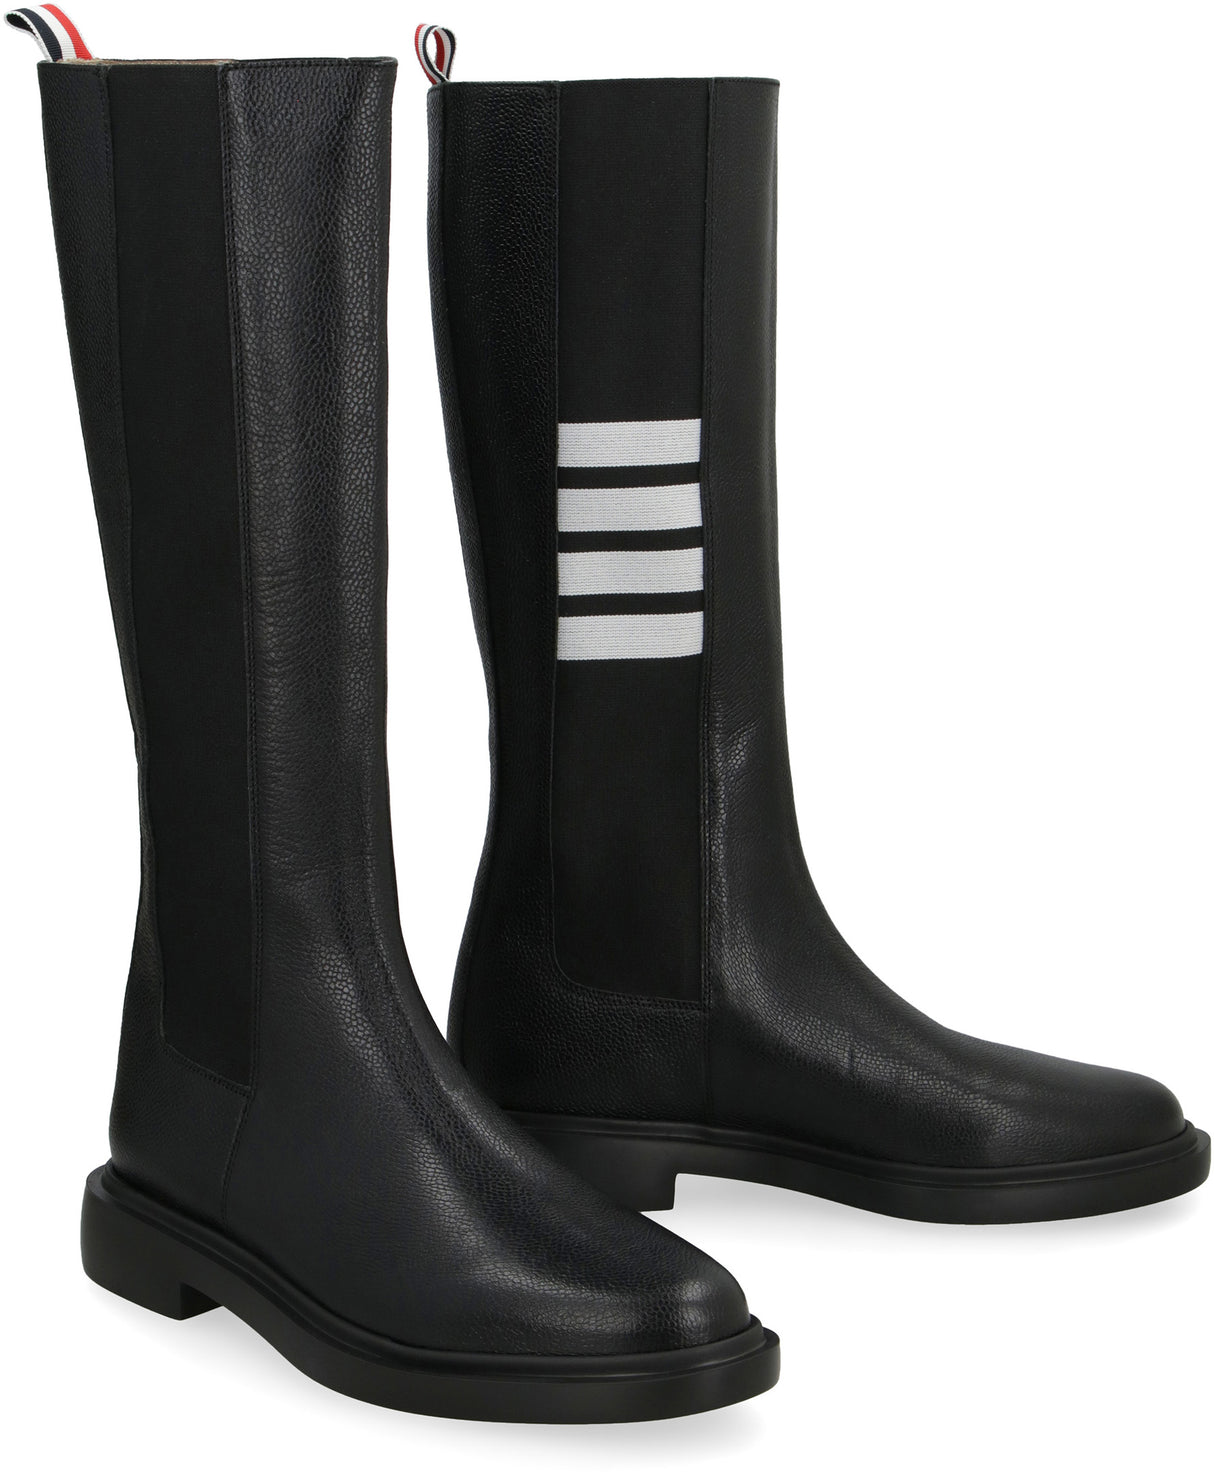 THOM BROWNE Black Leather Boots for Women - FW23 Collection